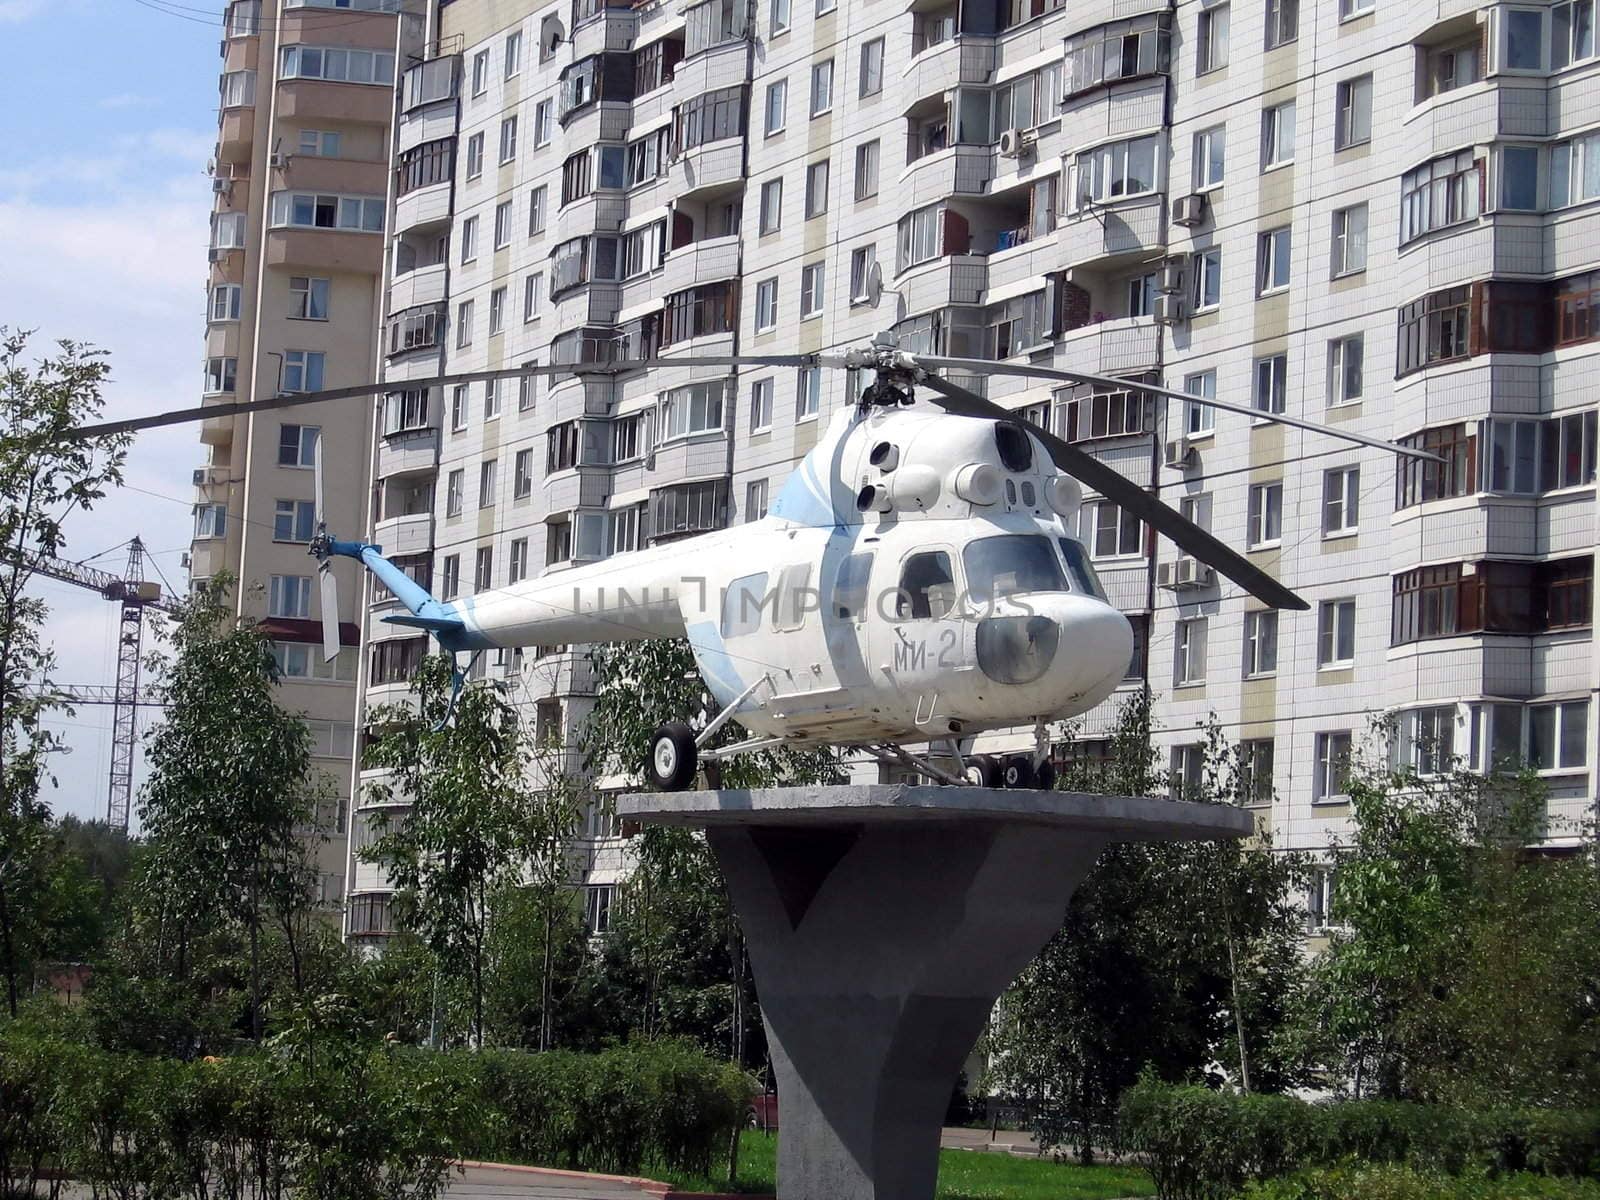 Helicopter MI-2 by tomatto